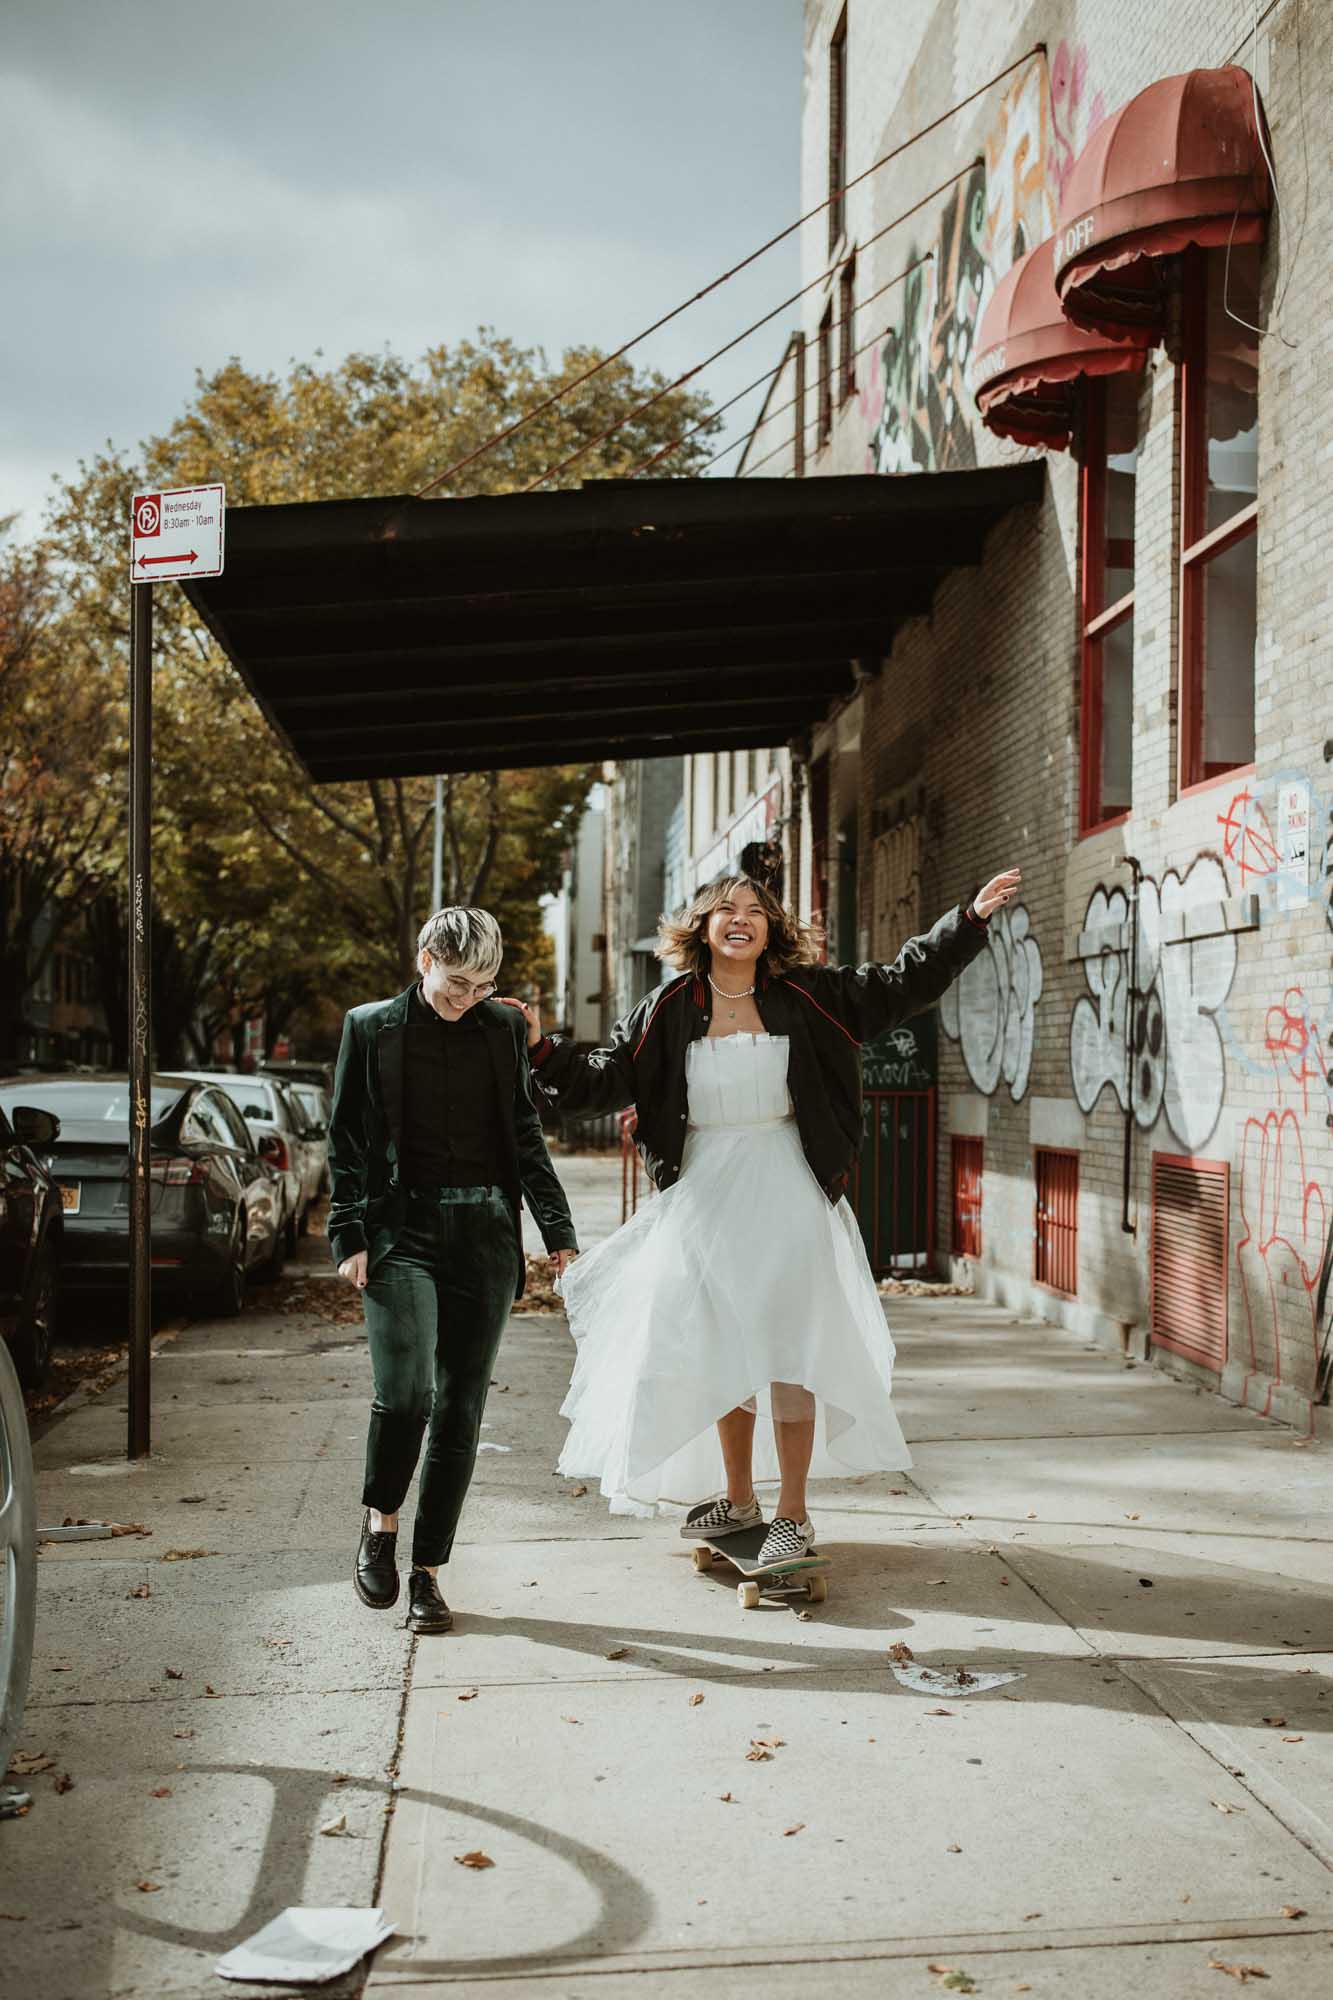 Outdoor Brooklyn microwedding styled shoot | Photography by Lucie B Photography | Featured on Equally Wed, the world's leading LGBTQ+ wedding magazine | LGBTQ+ couple celebrating their wedding with shoot in the streets, skateboard, leather jacket